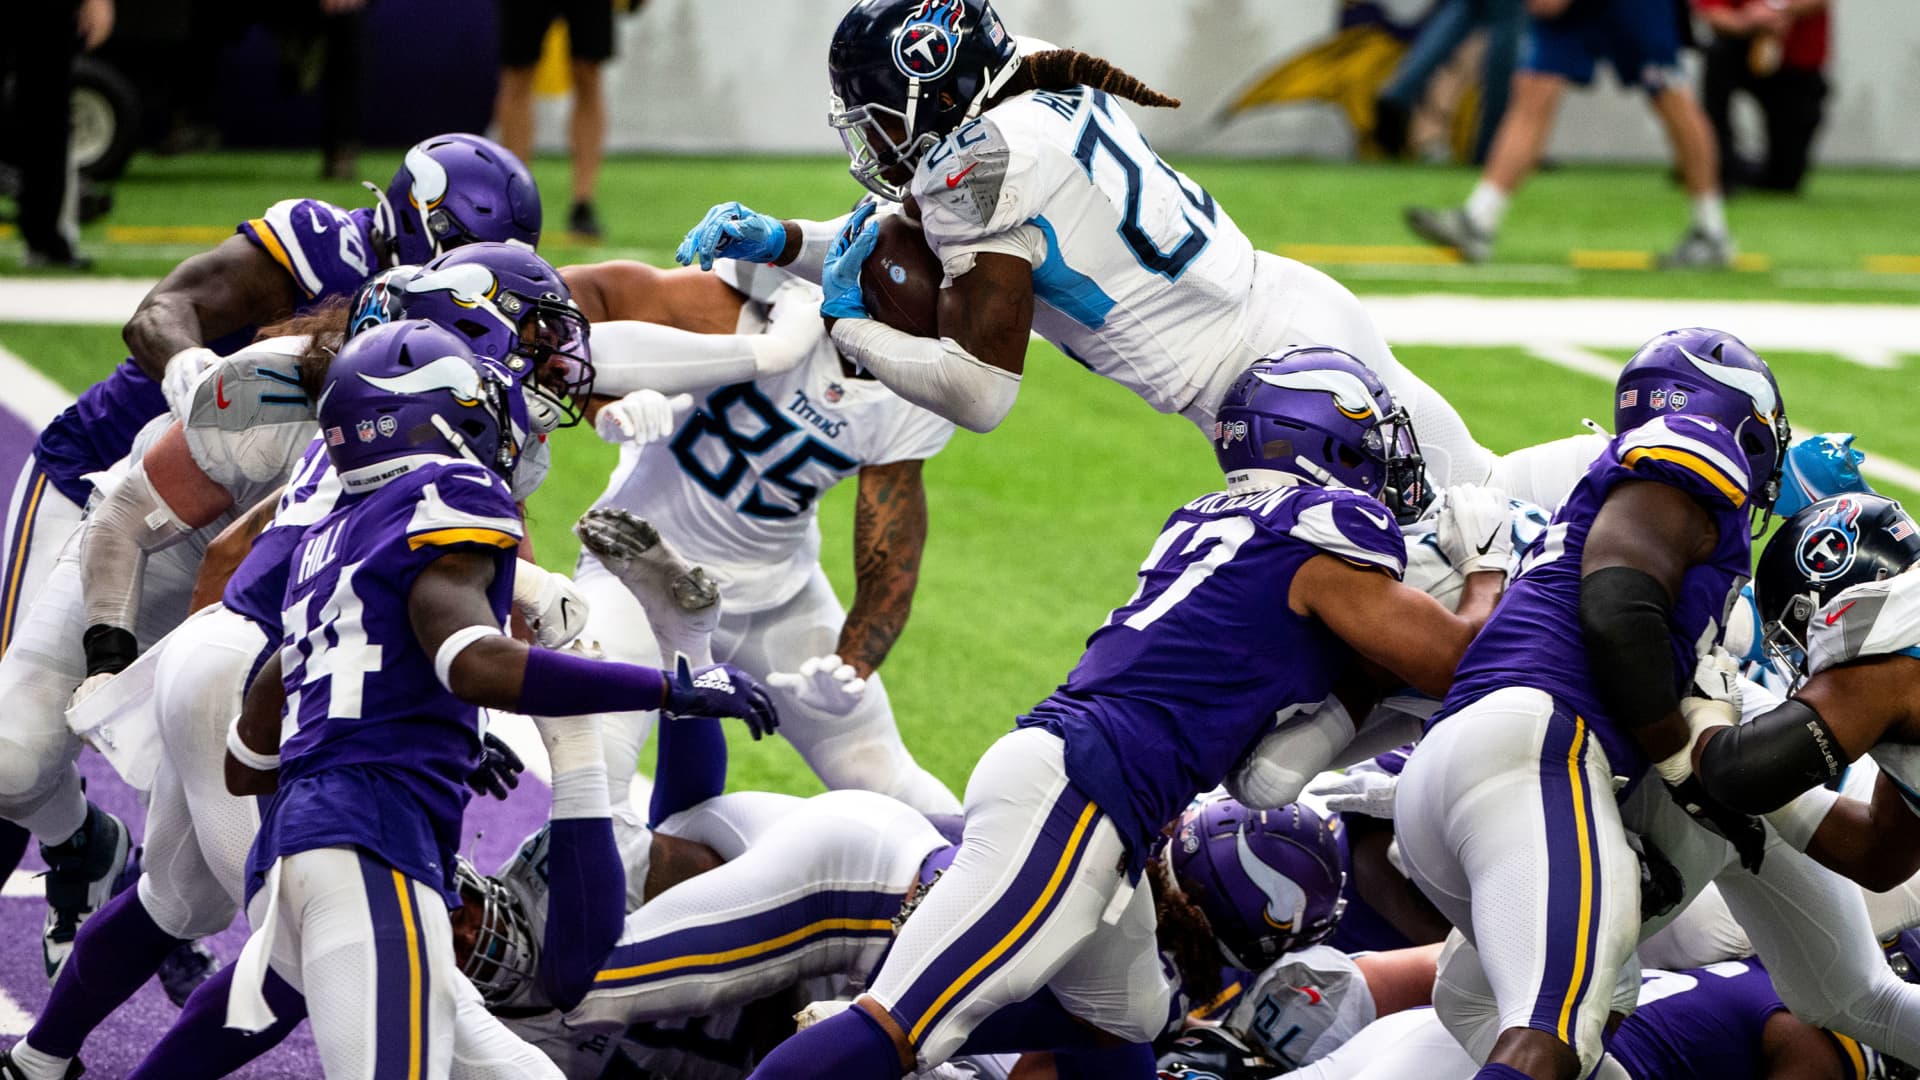 Derrick Henry #22 of the Tennessee Titans dives with the ball into the end zone for a touchdown in the third quarter of the game against the Minnesota Vikings at U.S. Bank Stadium on September 27, 2020 in Minneapolis, Minnesota.